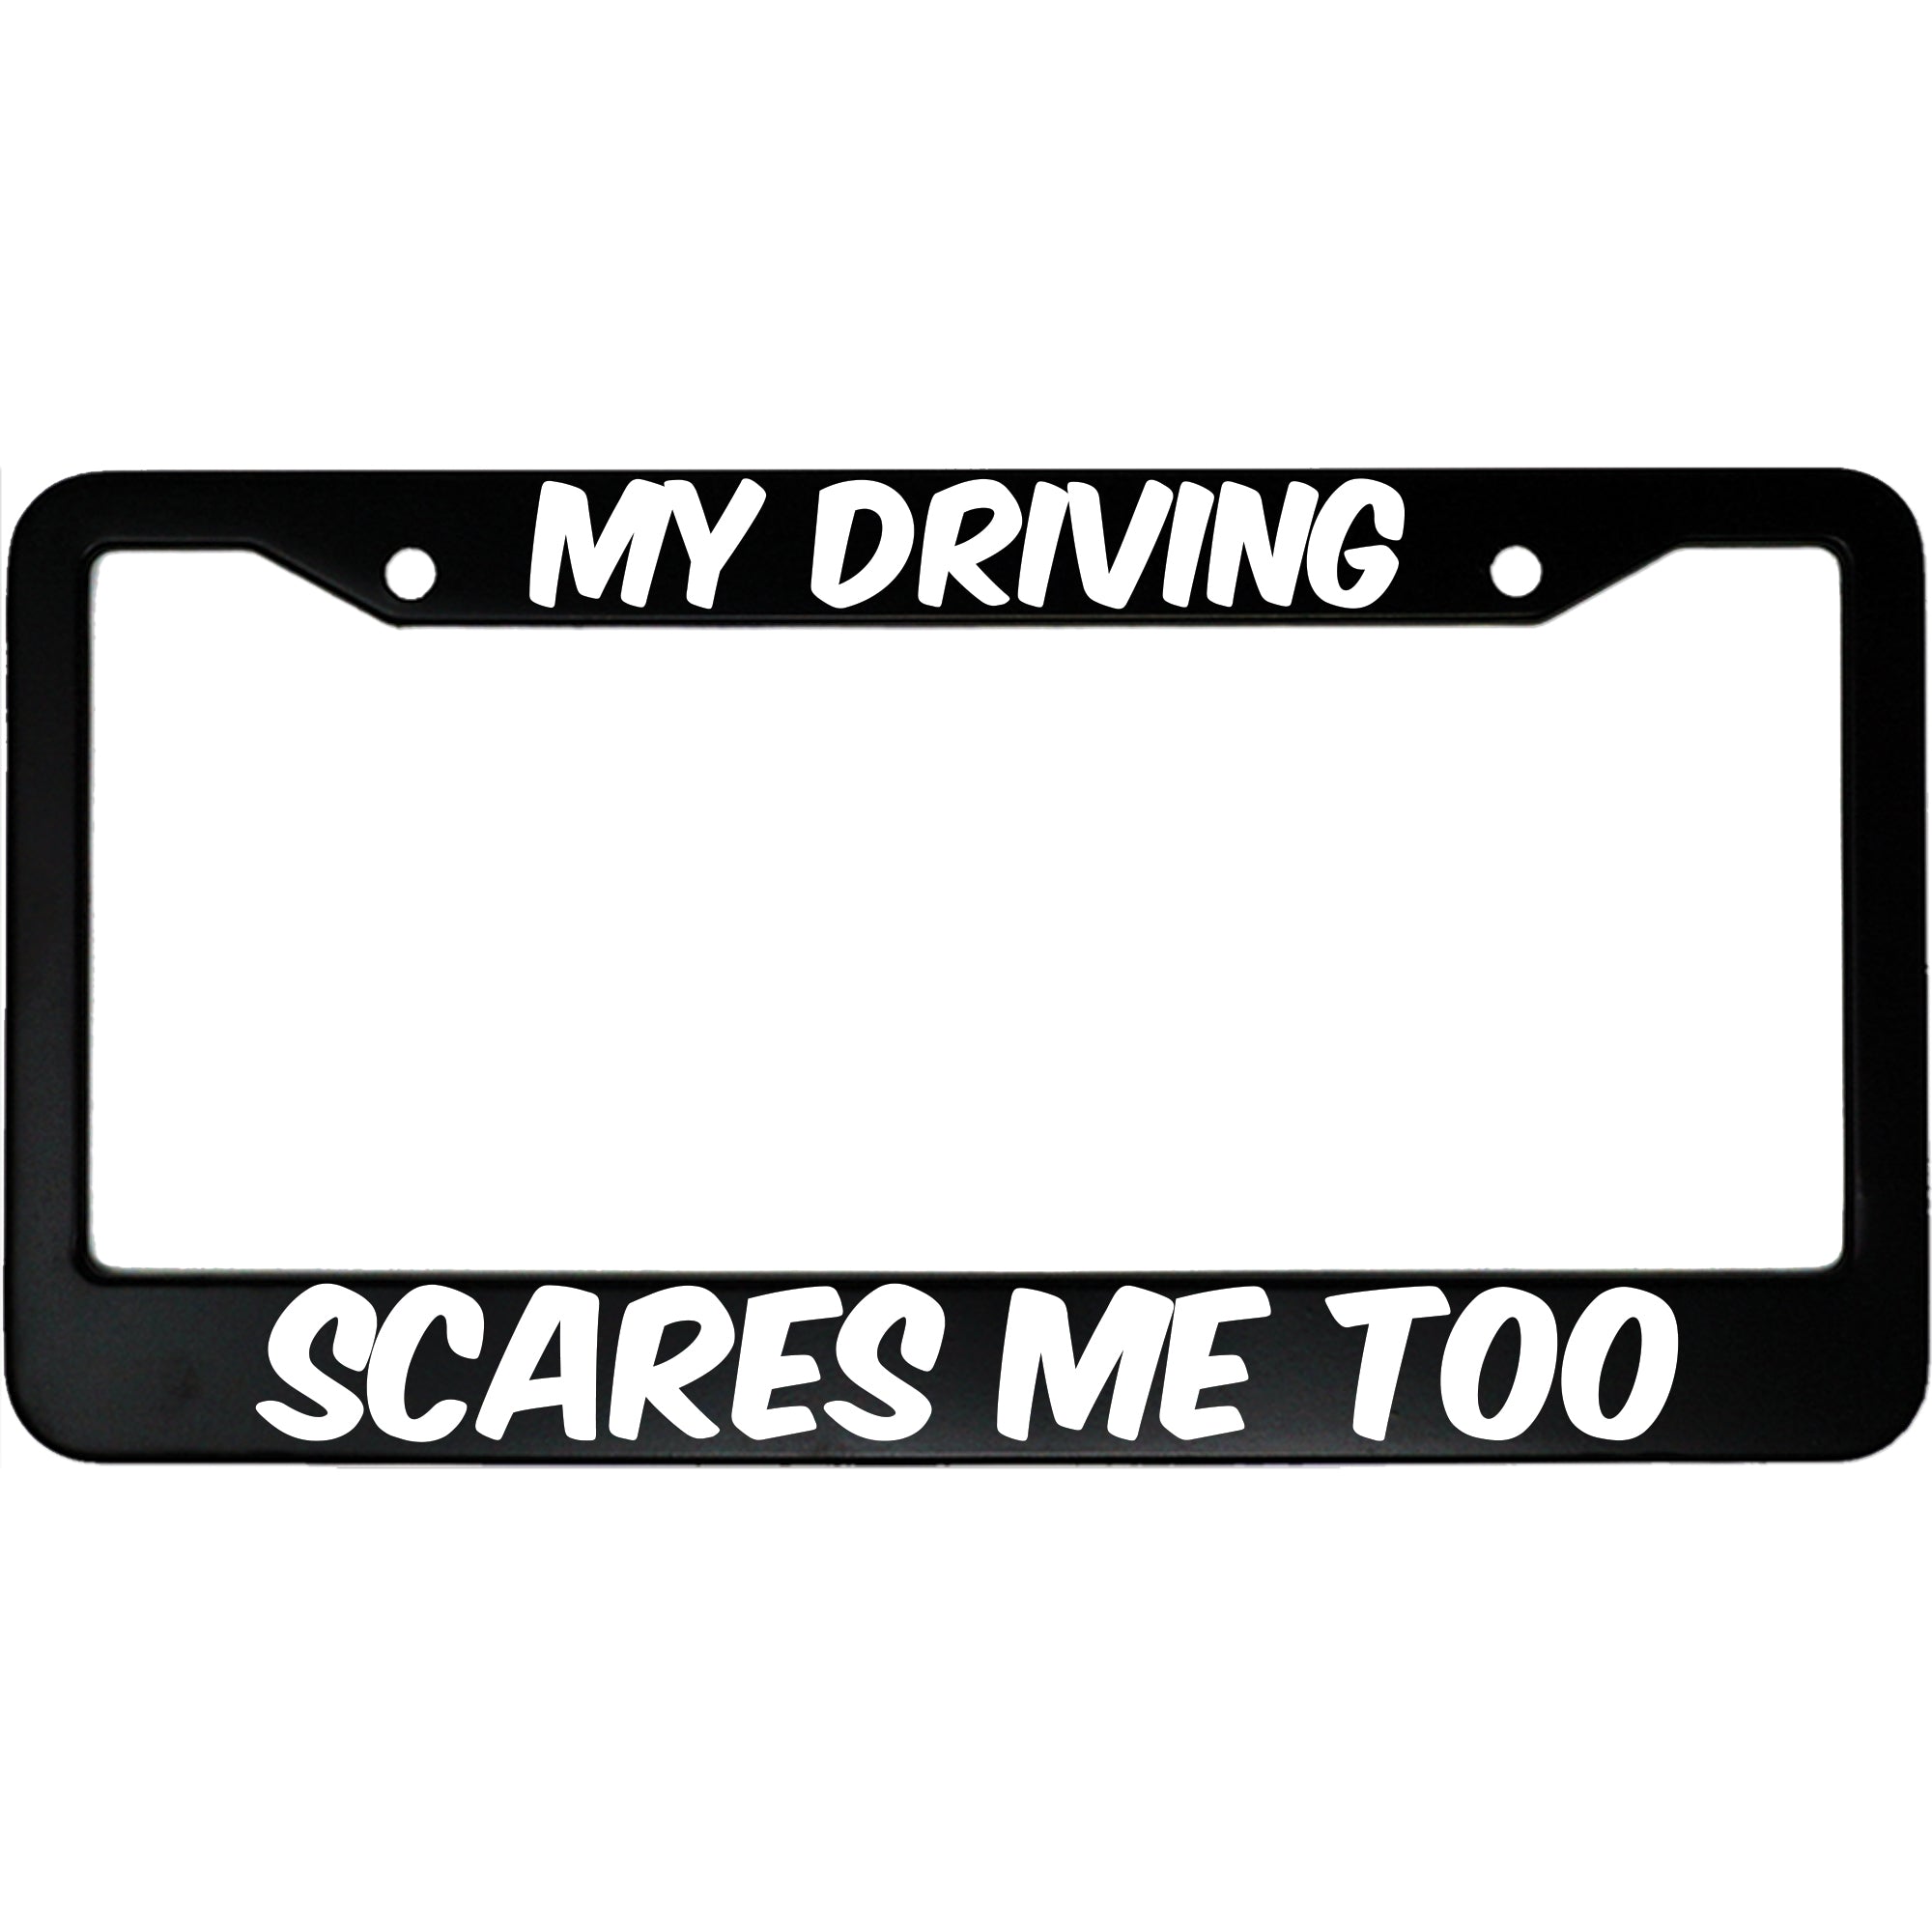 My Driving Scares Me Too Aluminum Car License Plate Frame